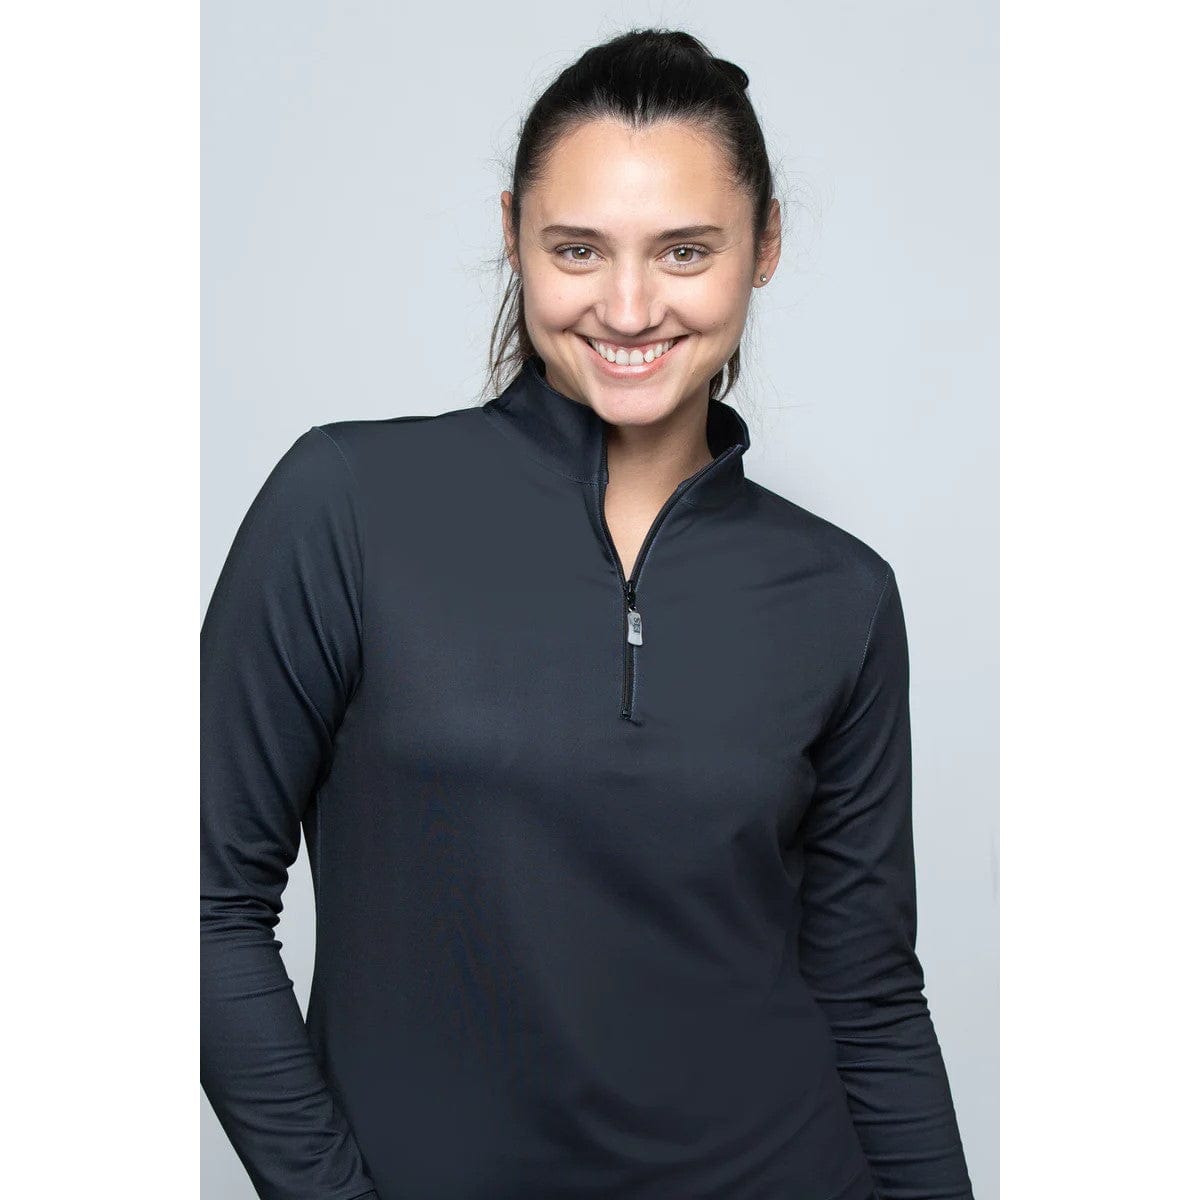 EIS Sunshirt XL / Black EIS- Cold Weather Sun Shirts equestrian team apparel online tack store mobile tack store custom farm apparel custom show stable clothing equestrian lifestyle horse show clothing riding clothes horses equestrian tack store